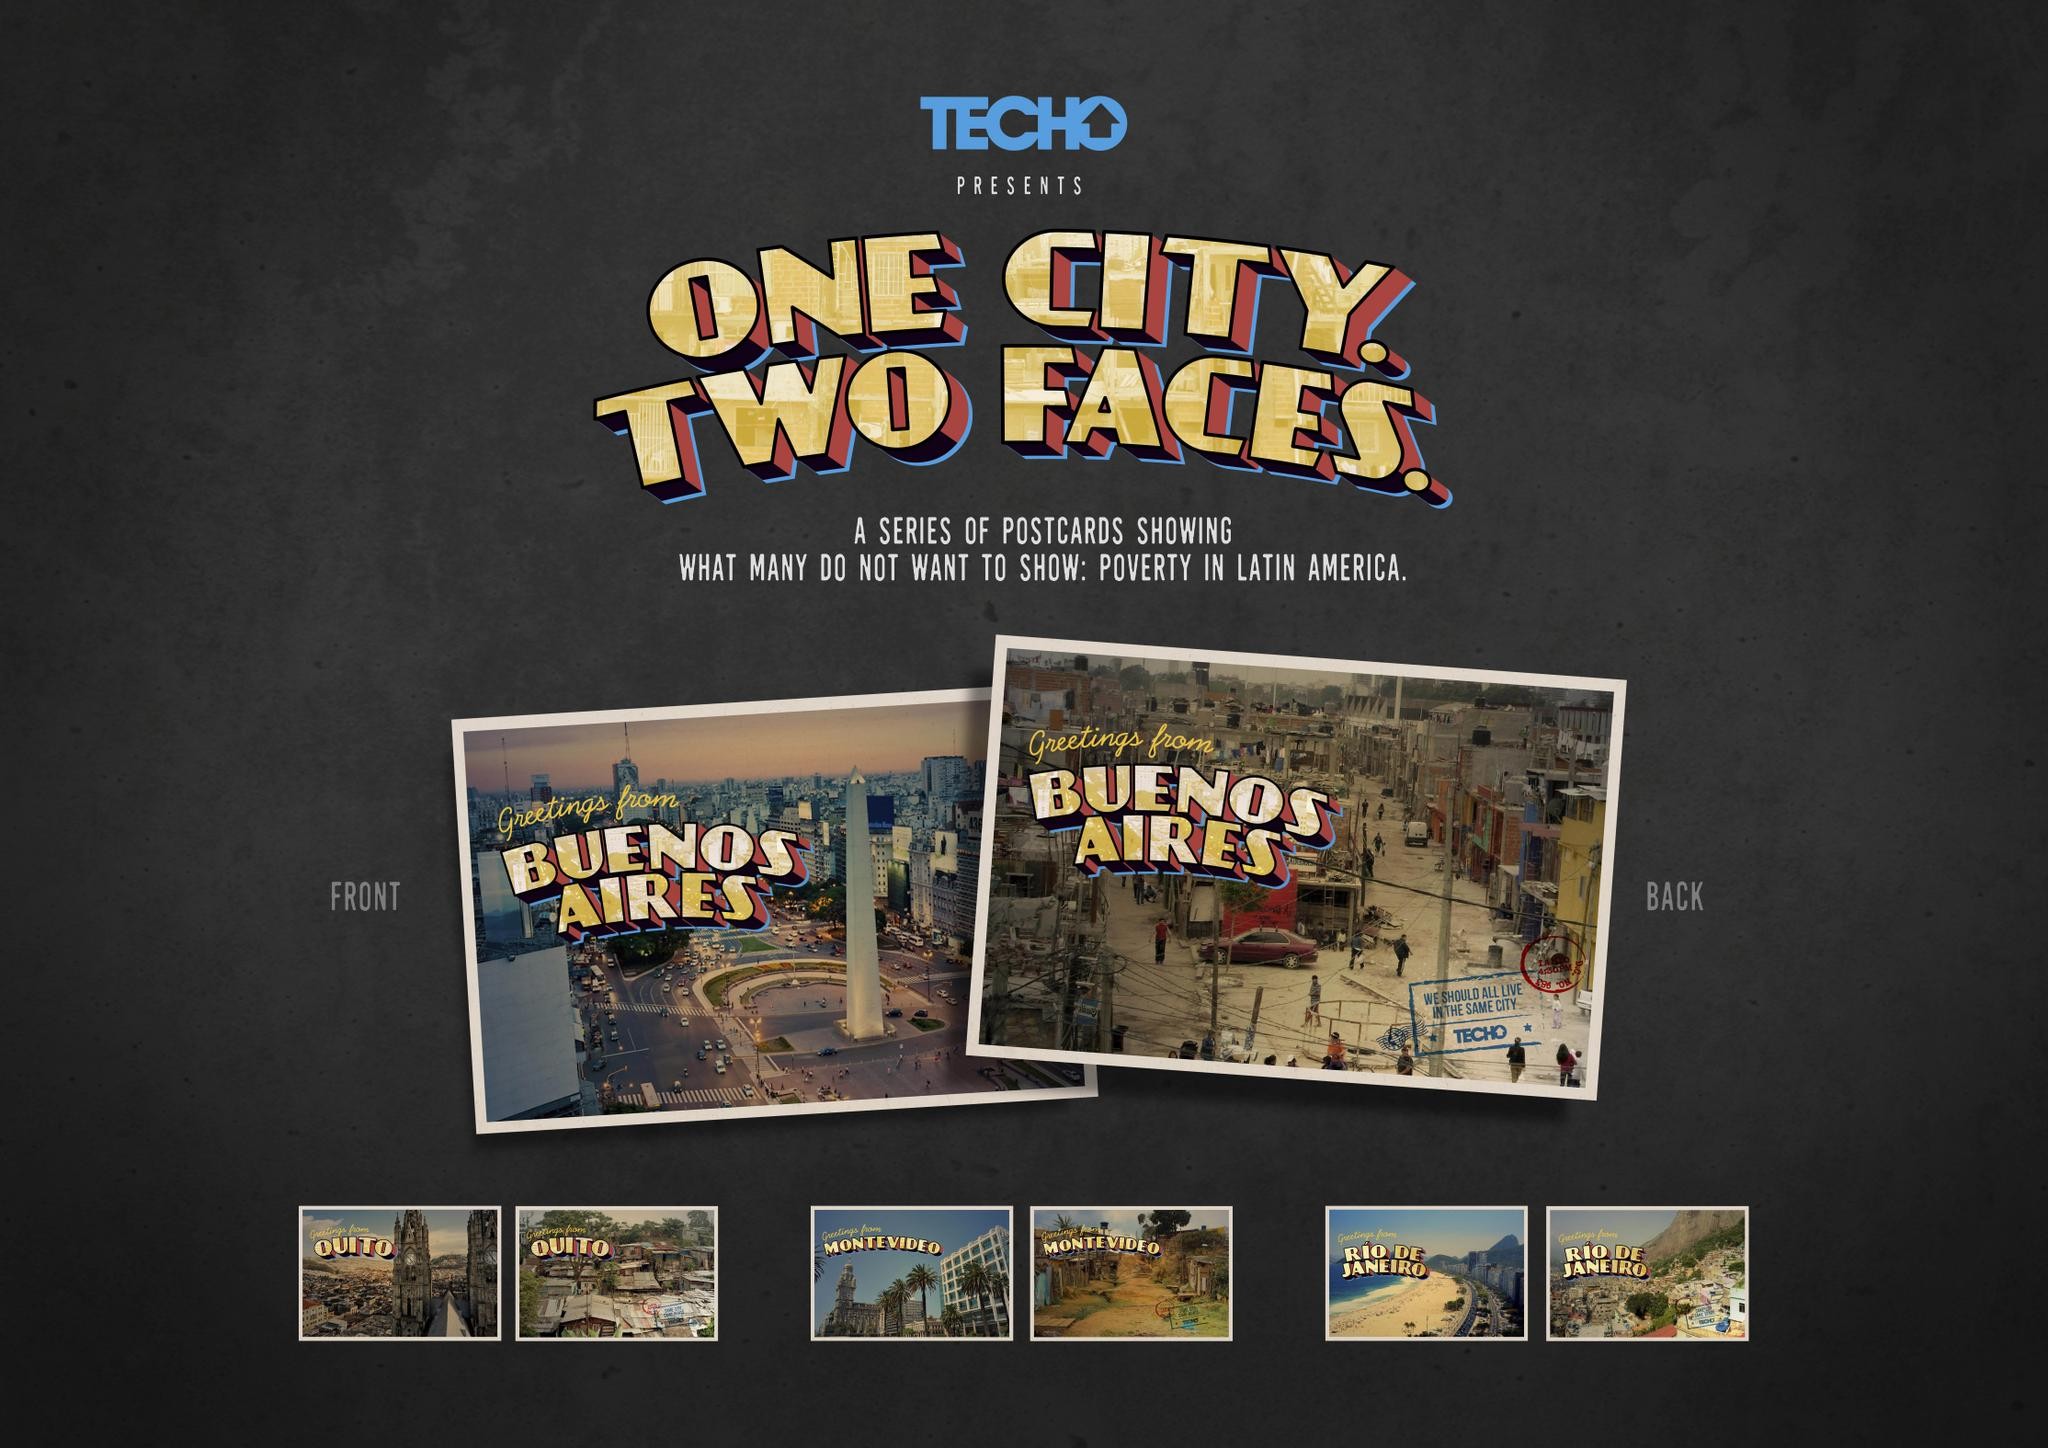 One city, two faces